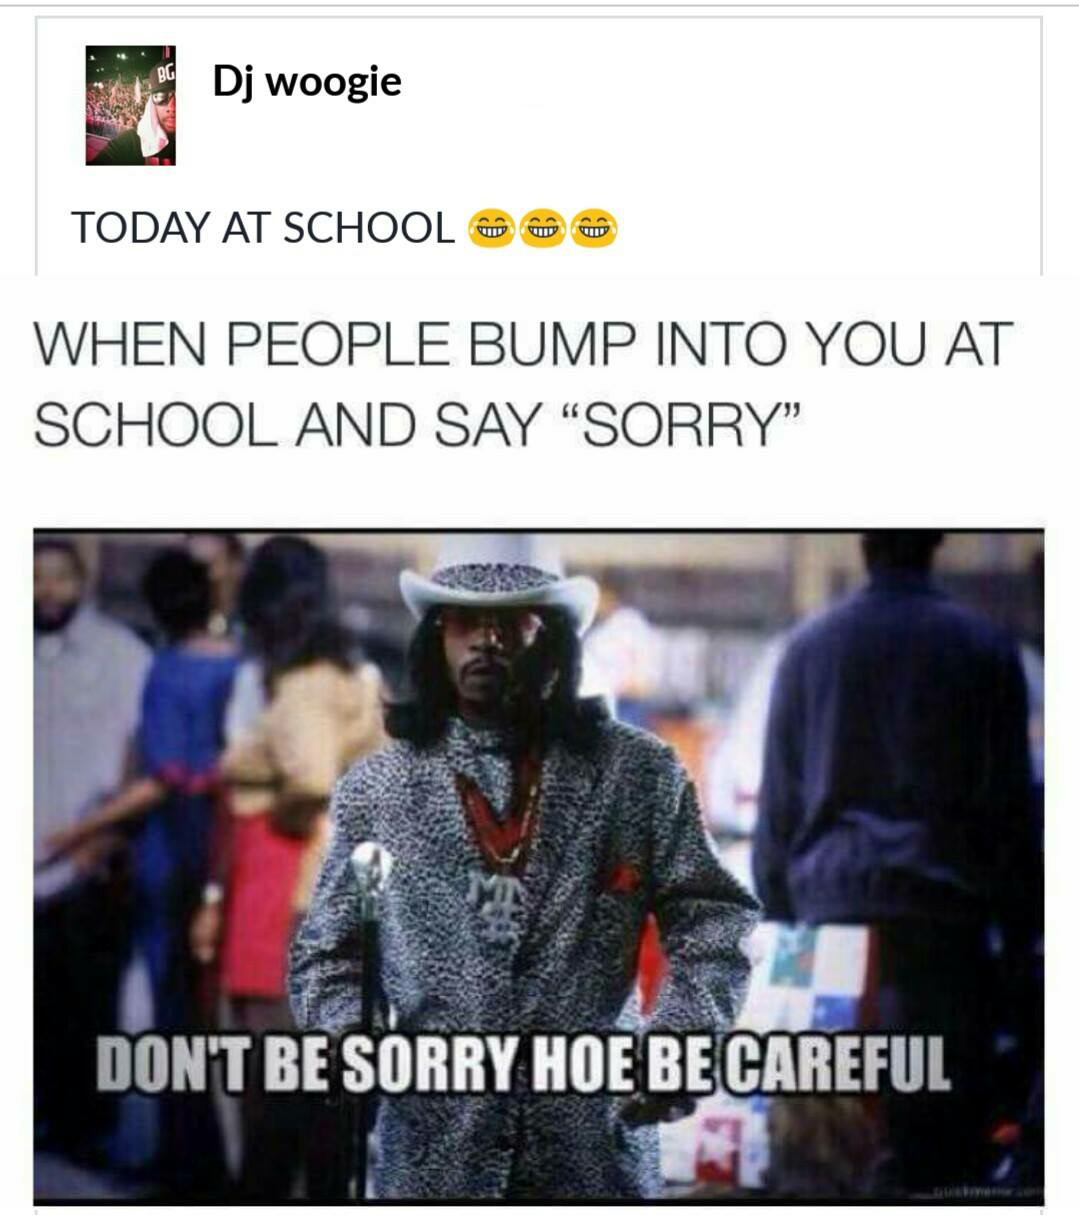 dont be sorry hoe be careful - Dj woogie Today At School w When People Bump Into You At School And Say "Sorry Don'T Be Sorry Hoe Be Careful